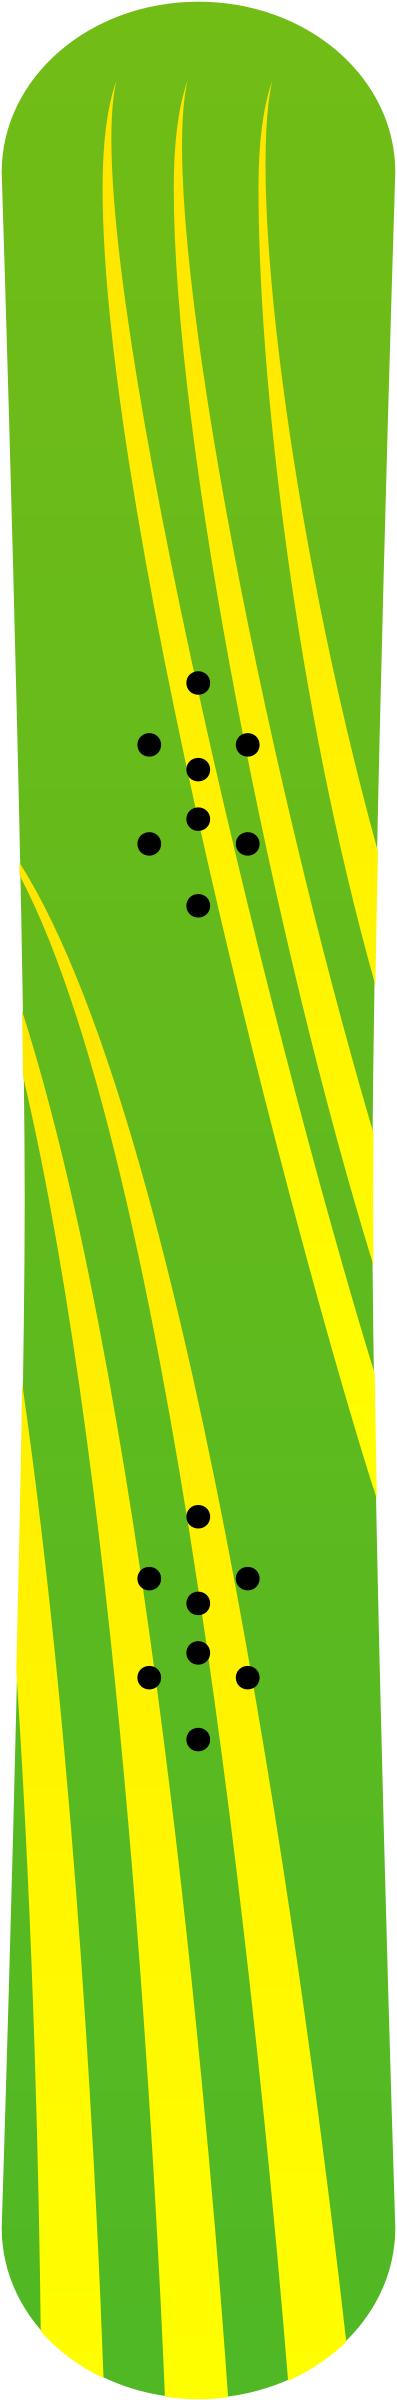 snowboard 1 png